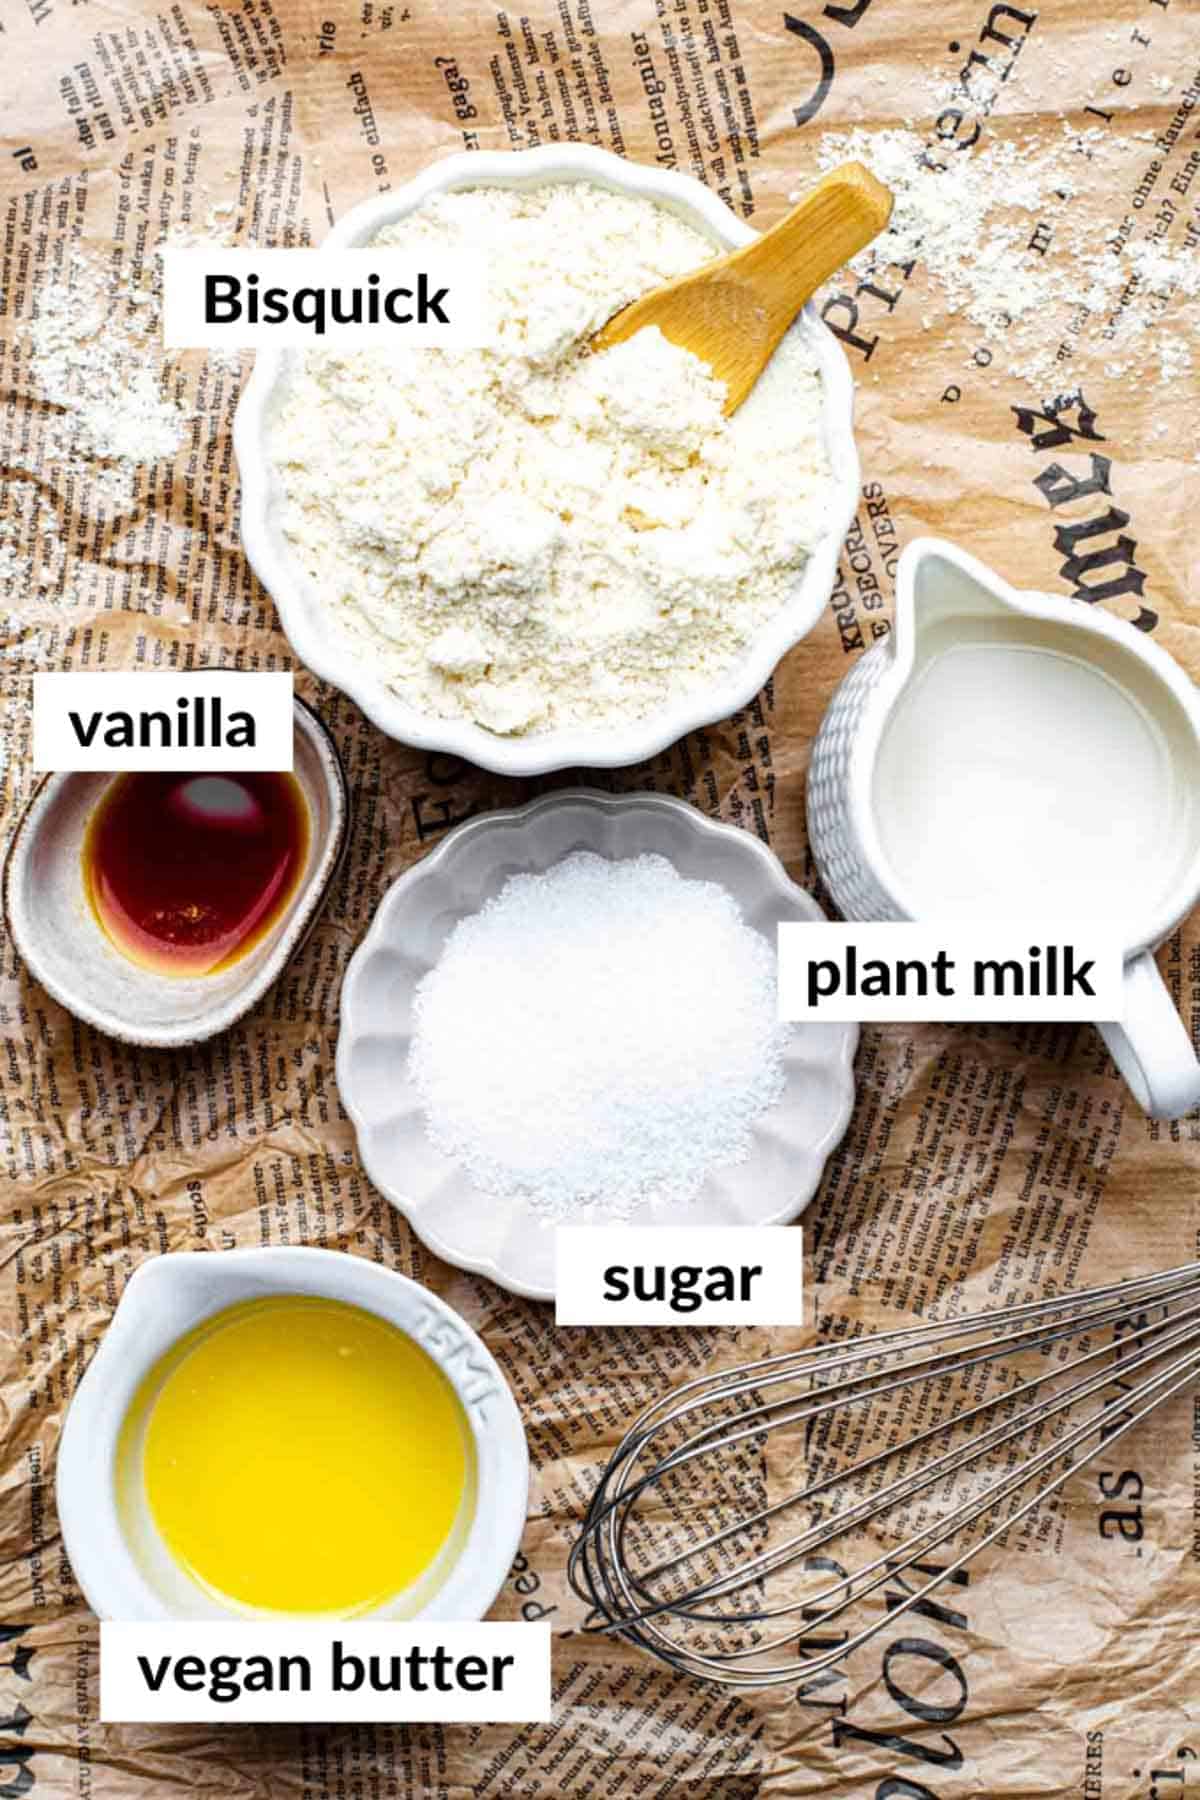 Gathered ingredients for making vegan Bisquick pancakes with text overlay on each ingredient.